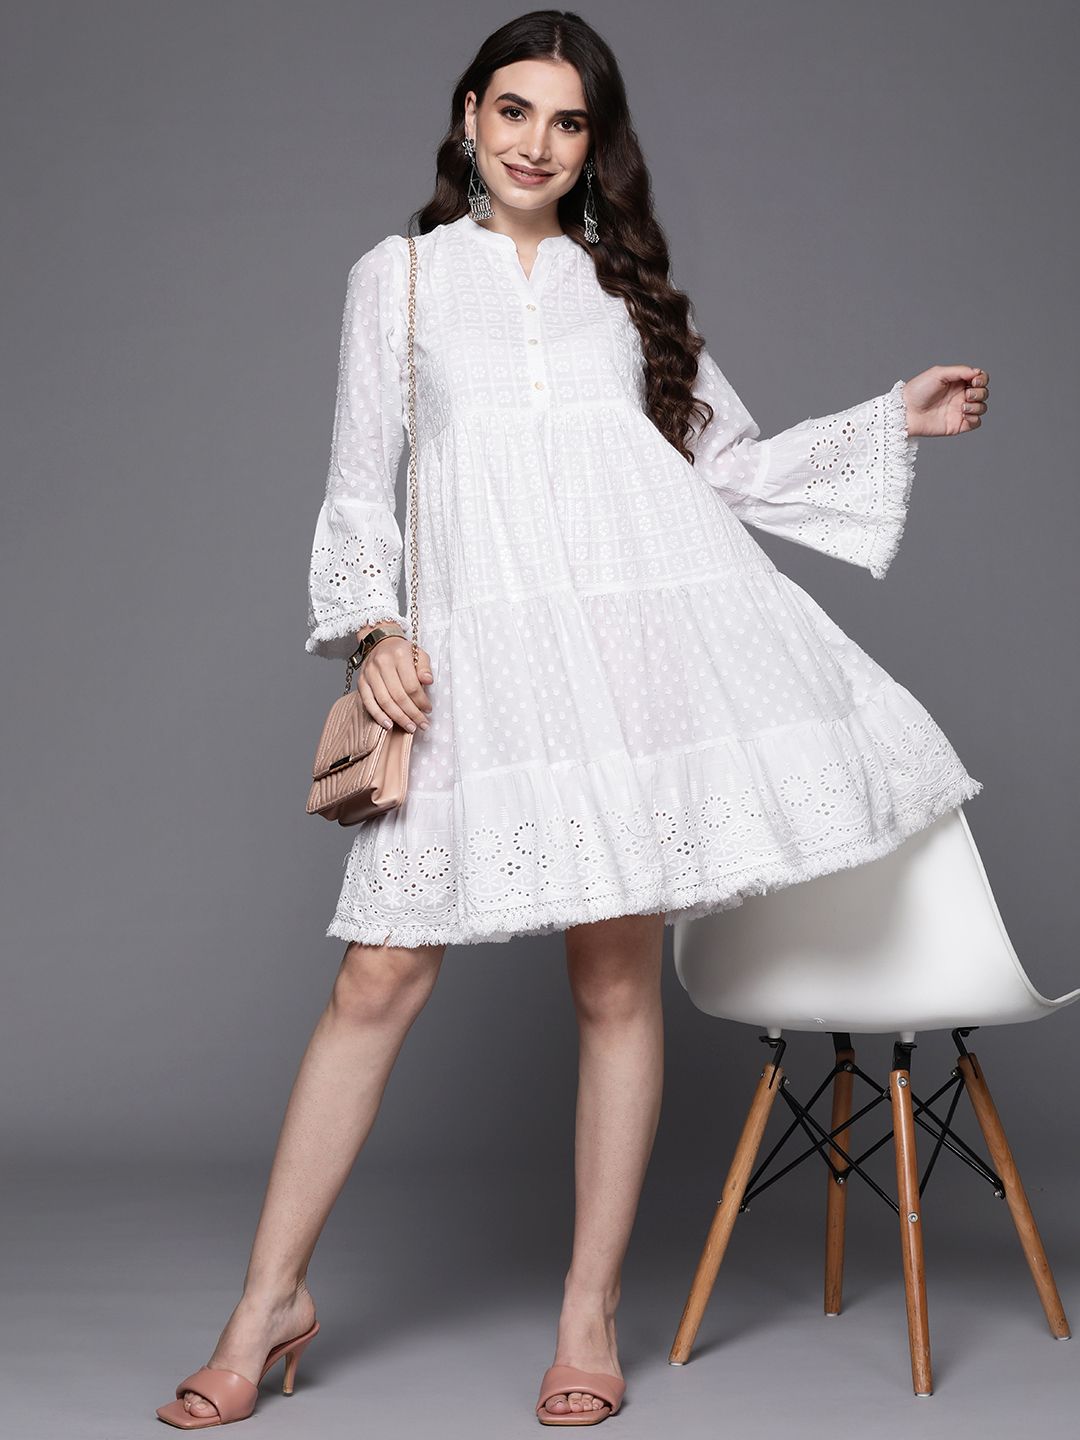 Indo Era White Floral Embroidered Ethnic A-Line Dress Price in India